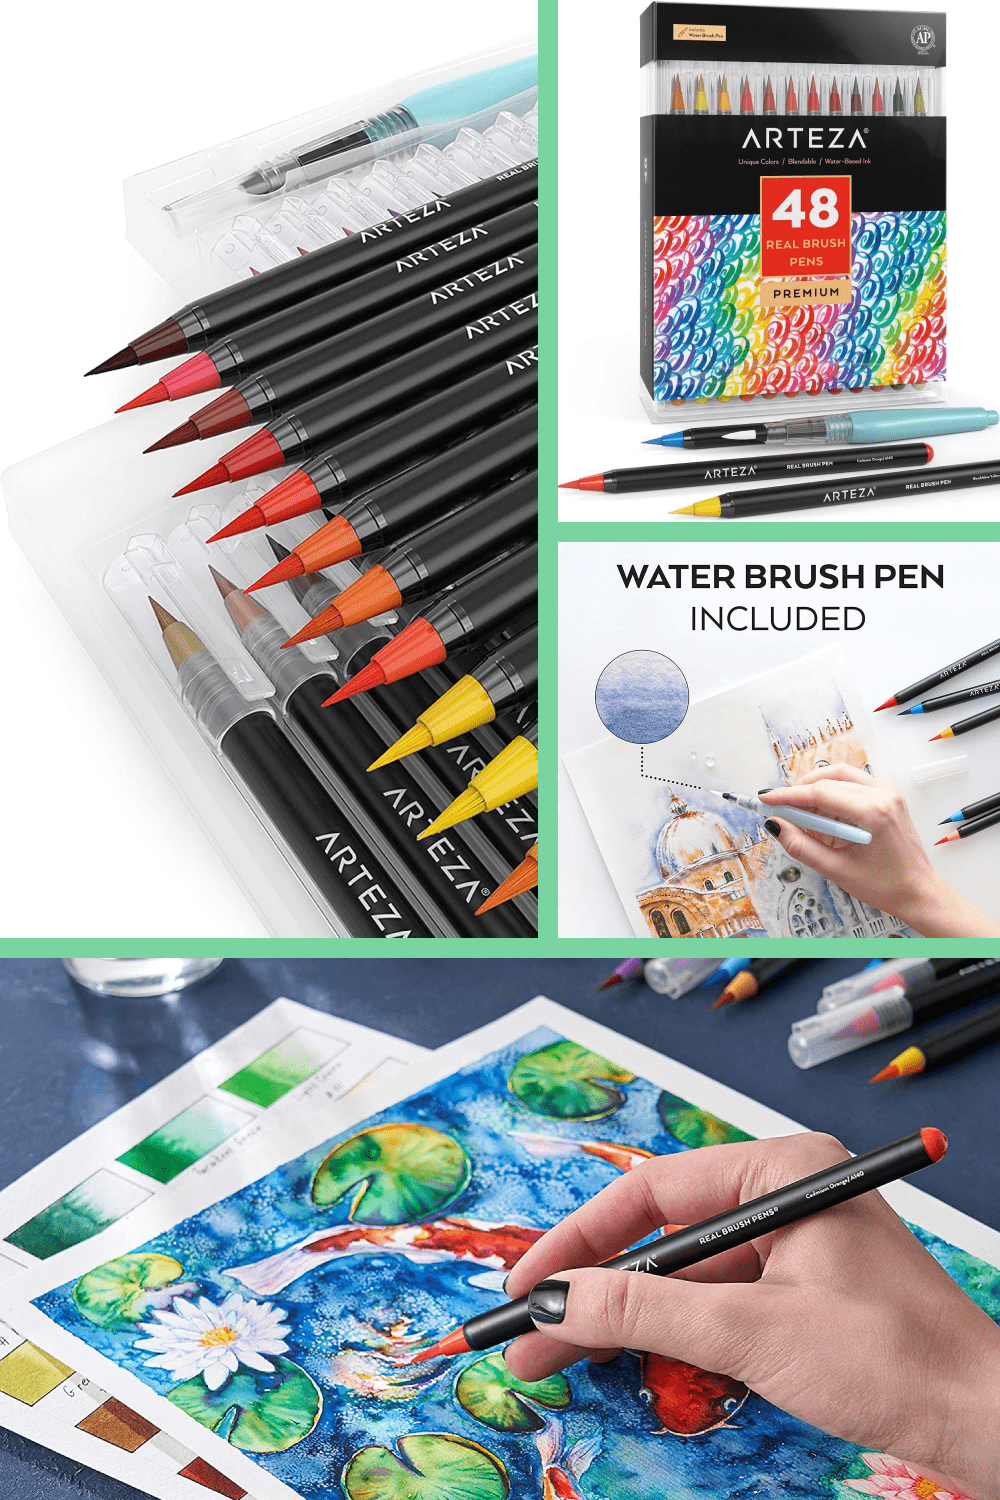 These premium paint pens offer richer colors & finer, more flexible tips than you'd get with costlier brands.